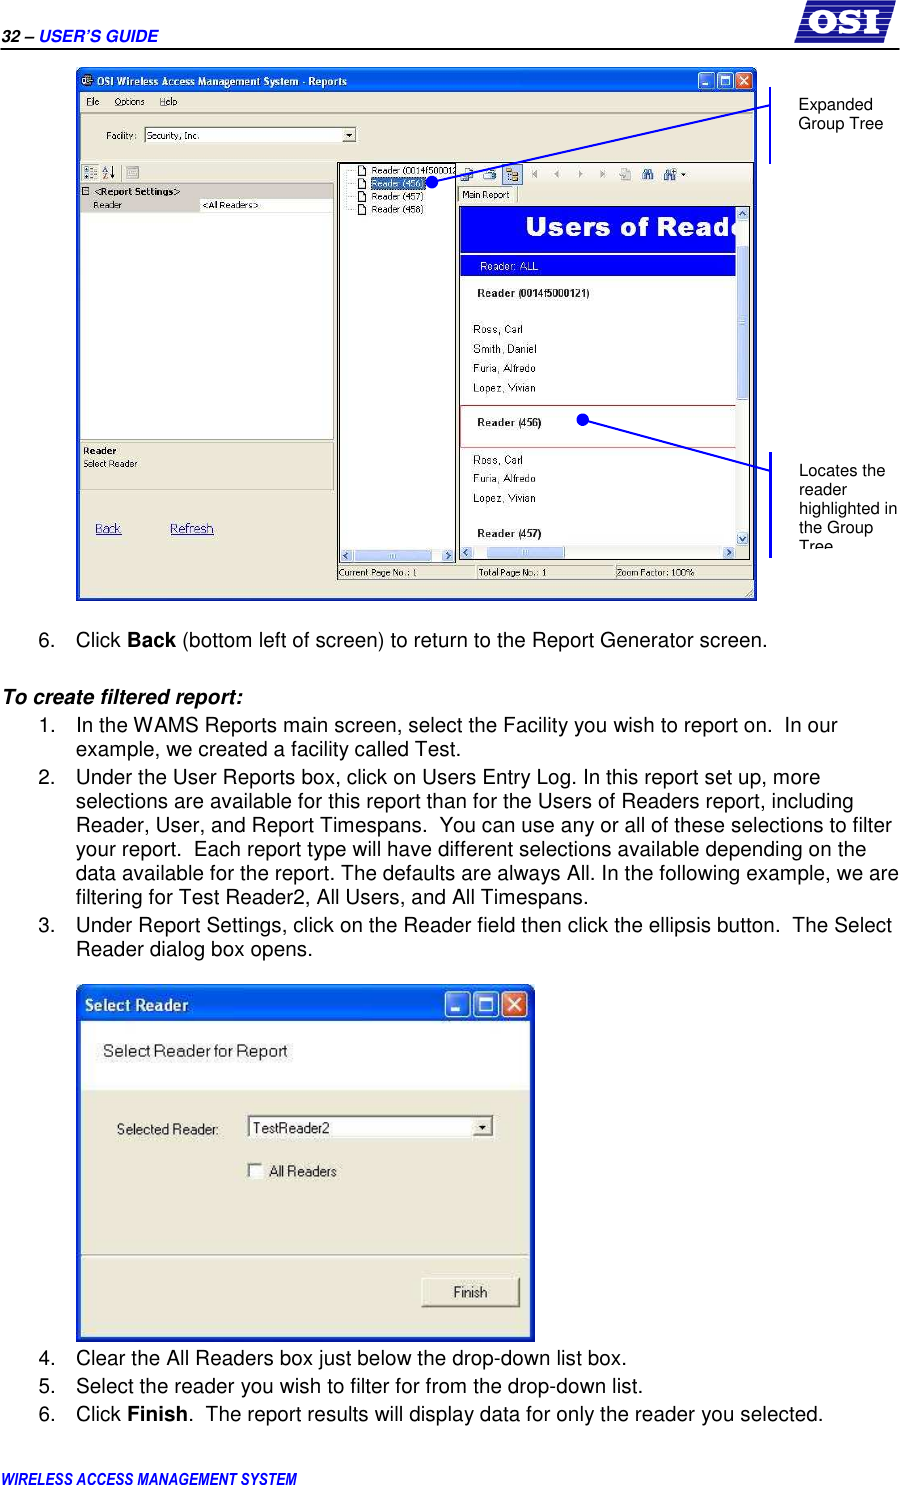 32 – USER’S GUIDE      WIRELESS ACCESS MANAGEMENT SYSTEM   6.  Click Back (bottom left of screen) to return to the Report Generator screen.  To create filtered report: 1.  In the WAMS Reports main screen, select the Facility you wish to report on.  In our example, we created a facility called Test. 2.  Under the User Reports box, click on Users Entry Log. In this report set up, more selections are available for this report than for the Users of Readers report, including Reader, User, and Report Timespans.  You can use any or all of these selections to filter your report.  Each report type will have different selections available depending on the data available for the report. The defaults are always All. In the following example, we are filtering for Test Reader2, All Users, and All Timespans. 3.  Under Report Settings, click on the Reader field then click the ellipsis button.  The Select Reader dialog box opens.   4.  Clear the All Readers box just below the drop-down list box. 5.  Select the reader you wish to filter for from the drop-down list. 6.  Click Finish.  The report results will display data for only the reader you selected.  Expanded Group Tree Locates the reader highlighted in the Group Tree 